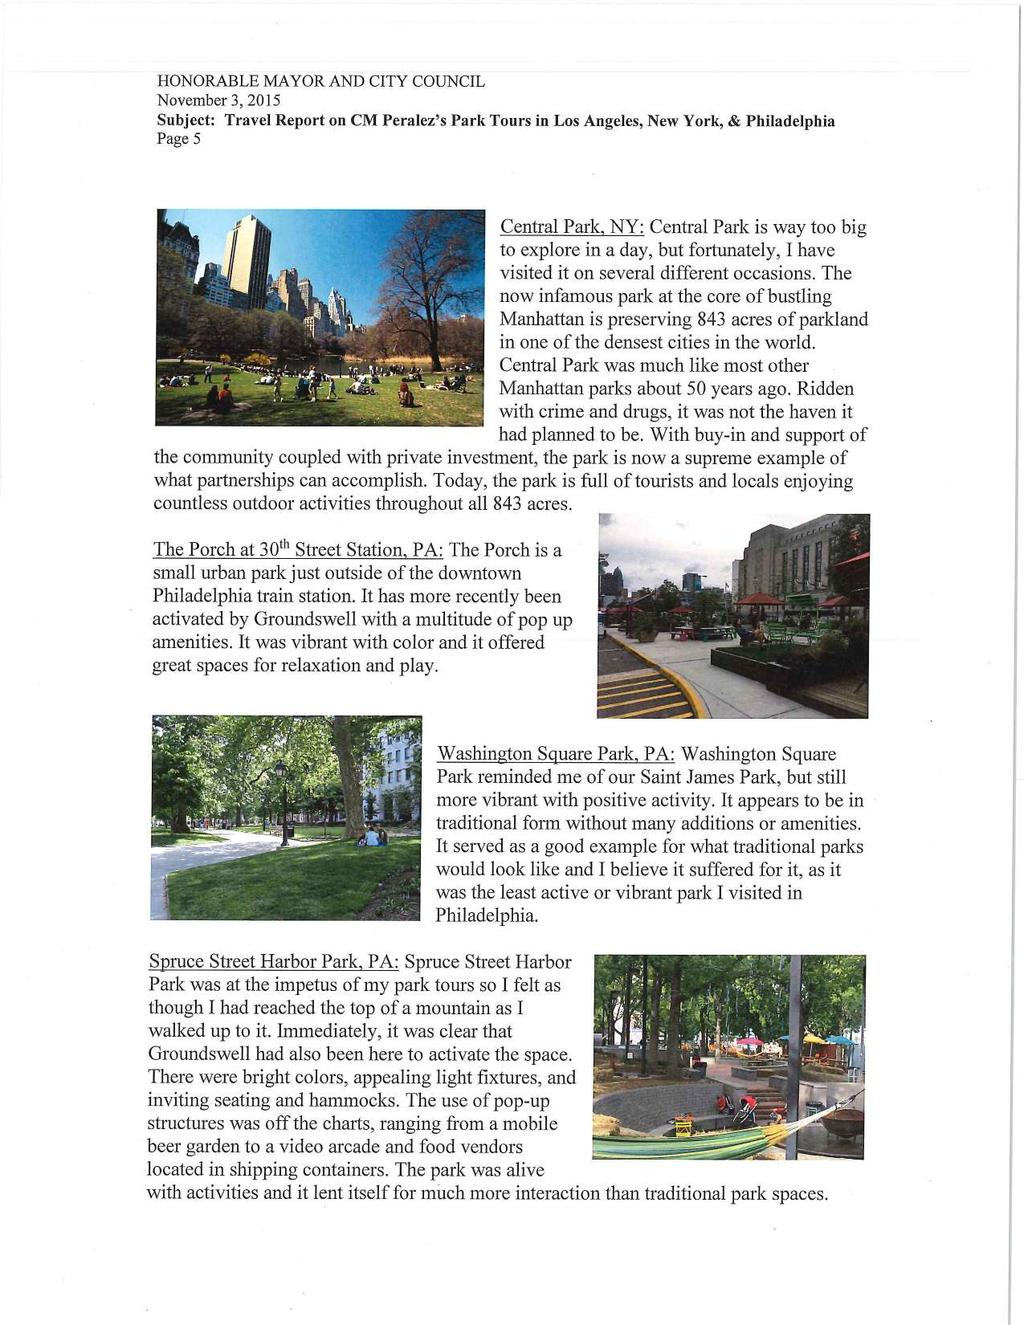 November 3,2015 Page 5 had planned to be^ With buy-in and support of the community coupled with private investment, the park is now a supreme example of what partnerships can accomplish.